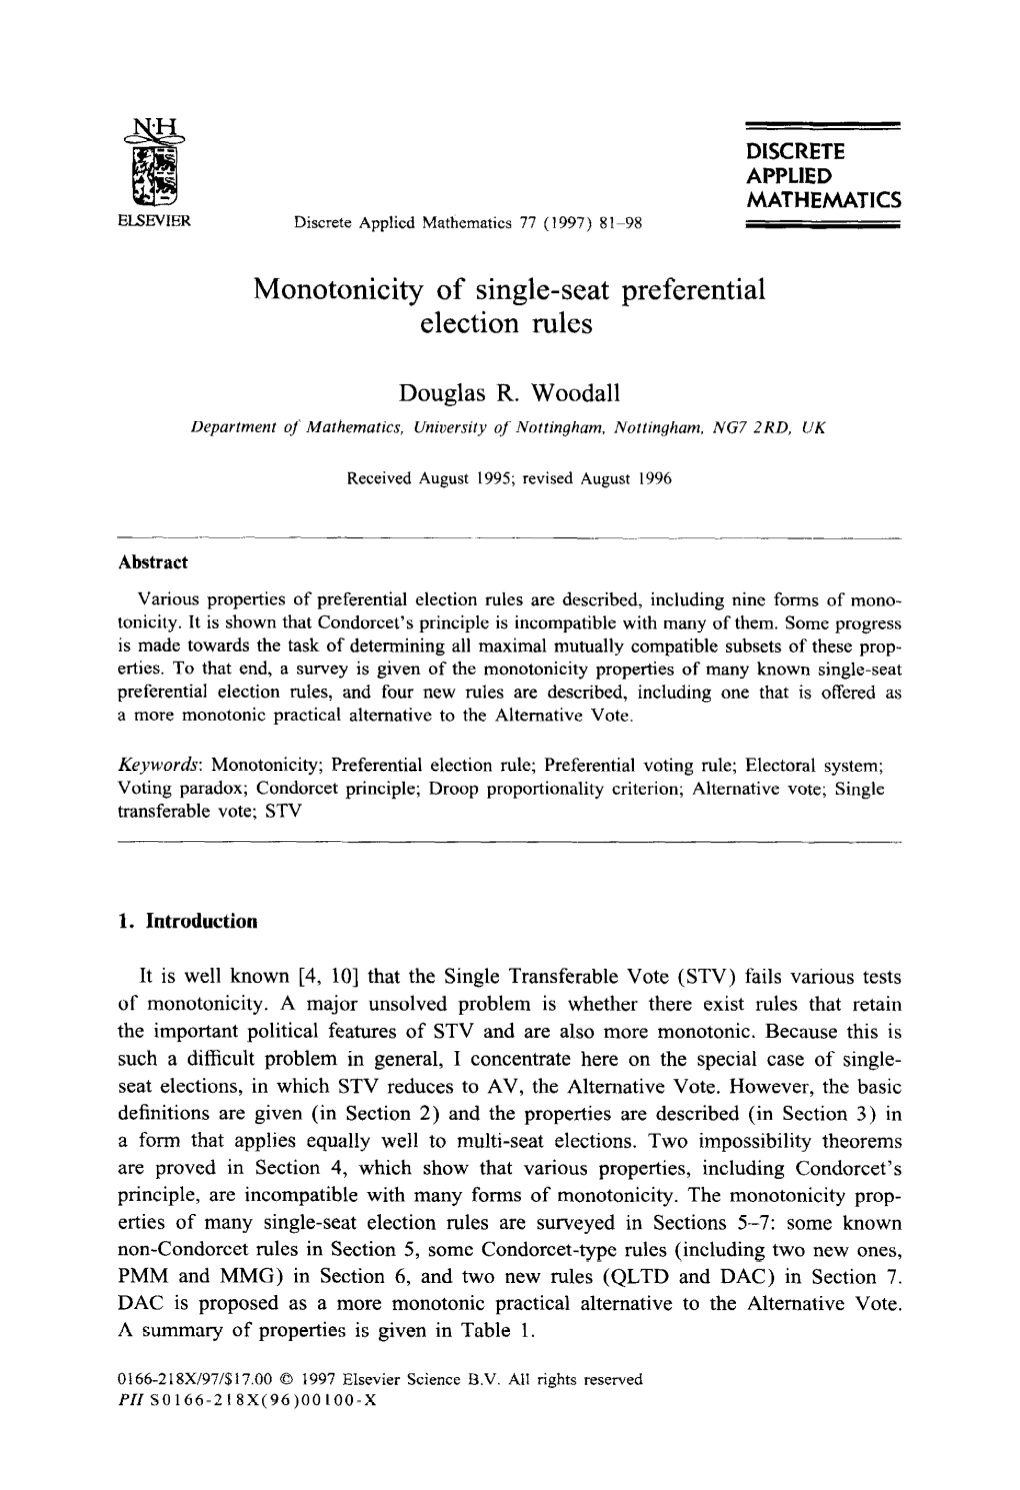 Monotonicity of Single-Seat Preferential Election Rules